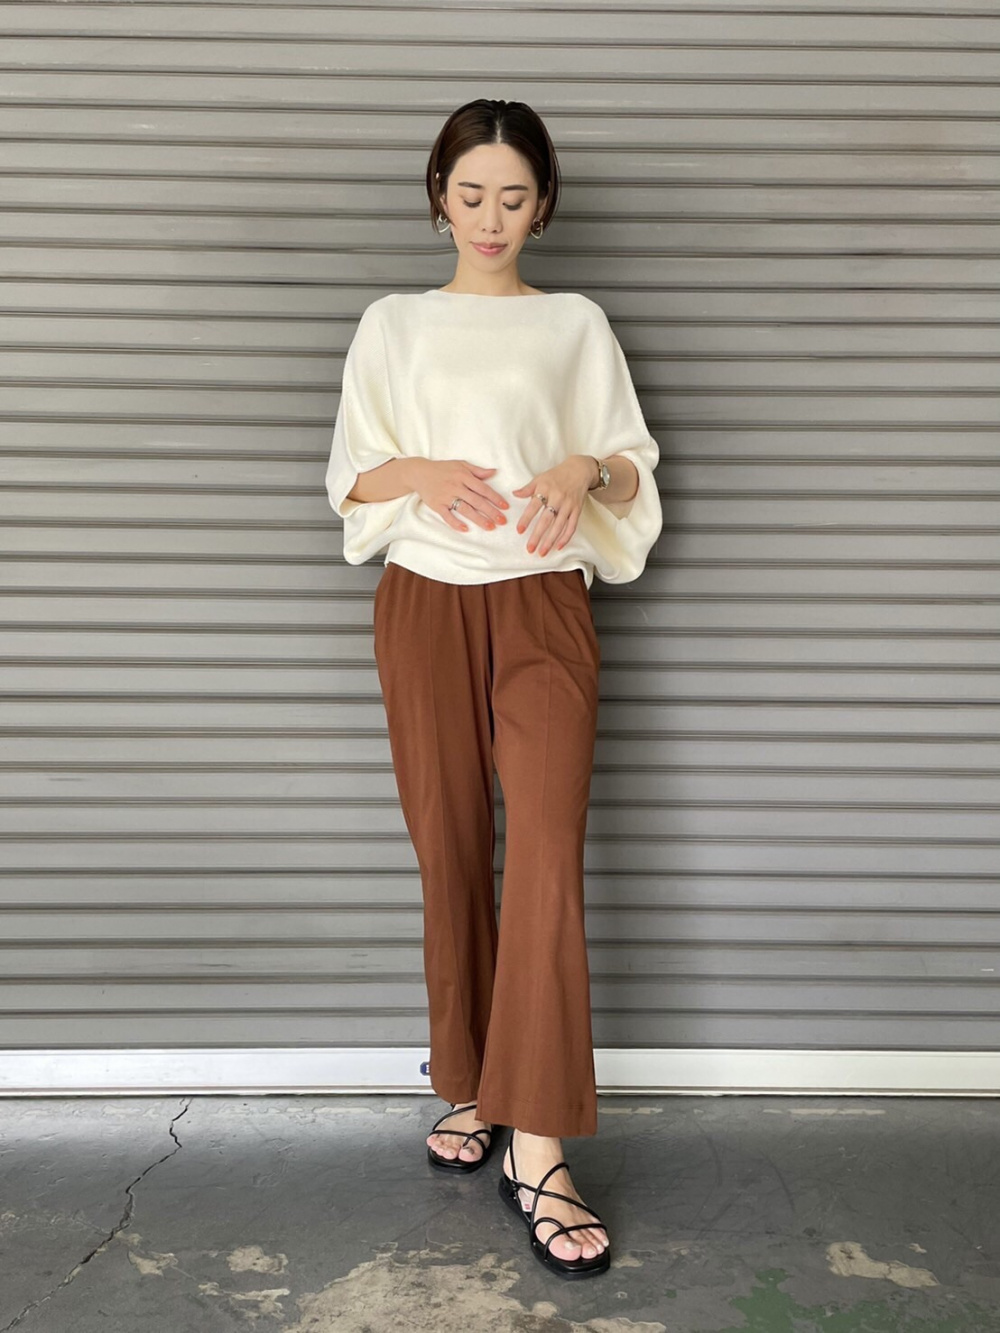 Check styling ideas for「3D Knit Cotton Dolman 3/4-Sleeve Sweater ...